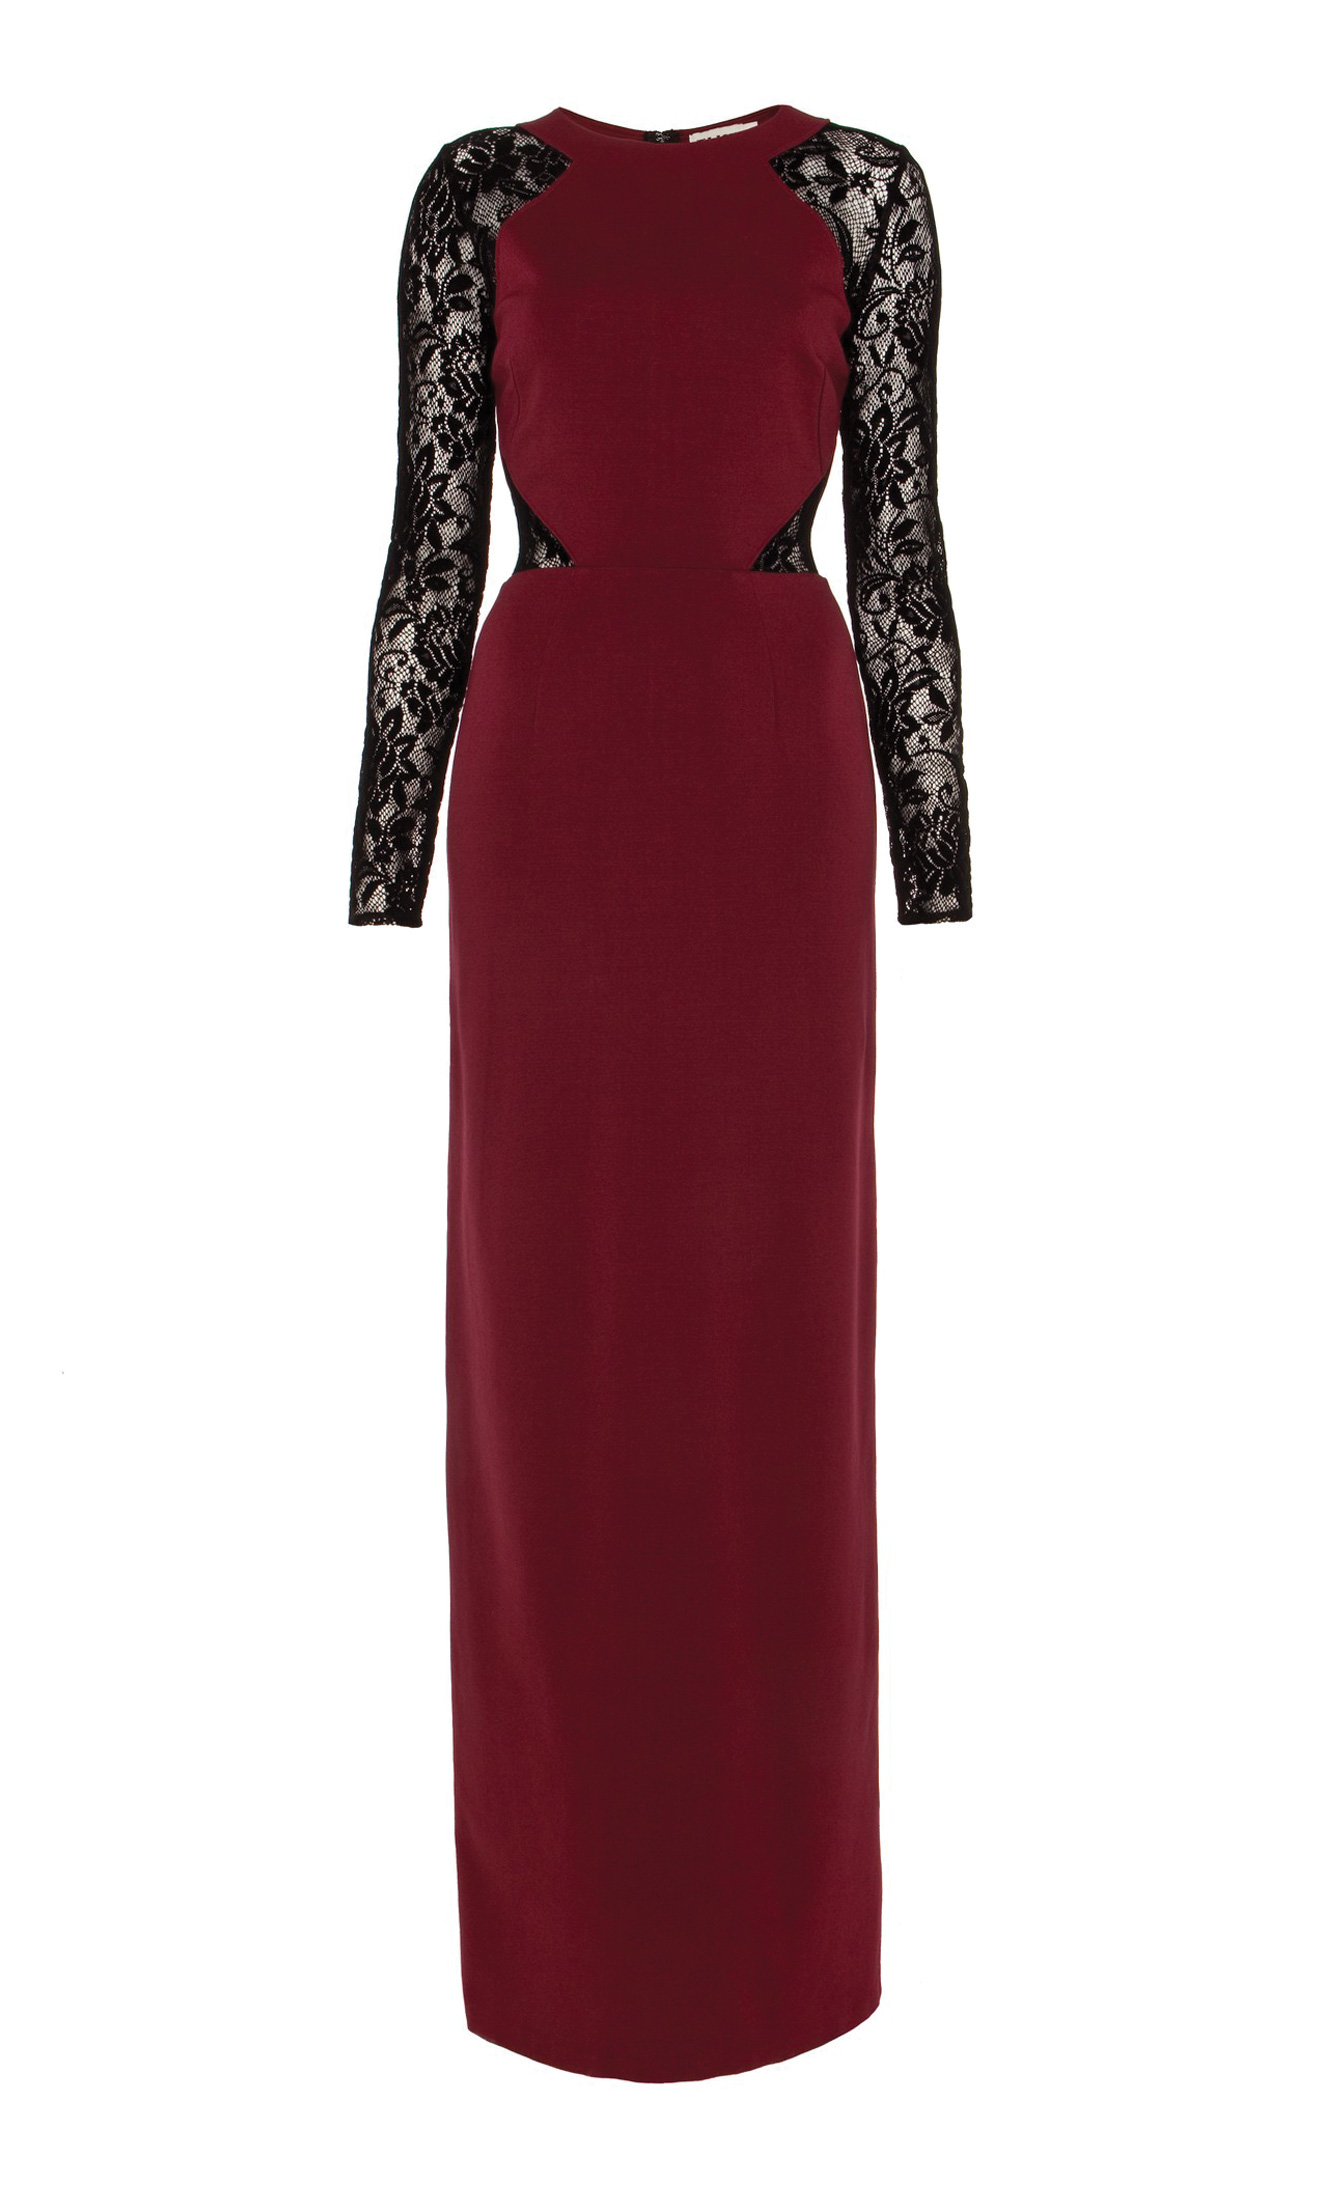 Temperley London Long Solitaire Dress in Bordeaux (Red) - Lyst